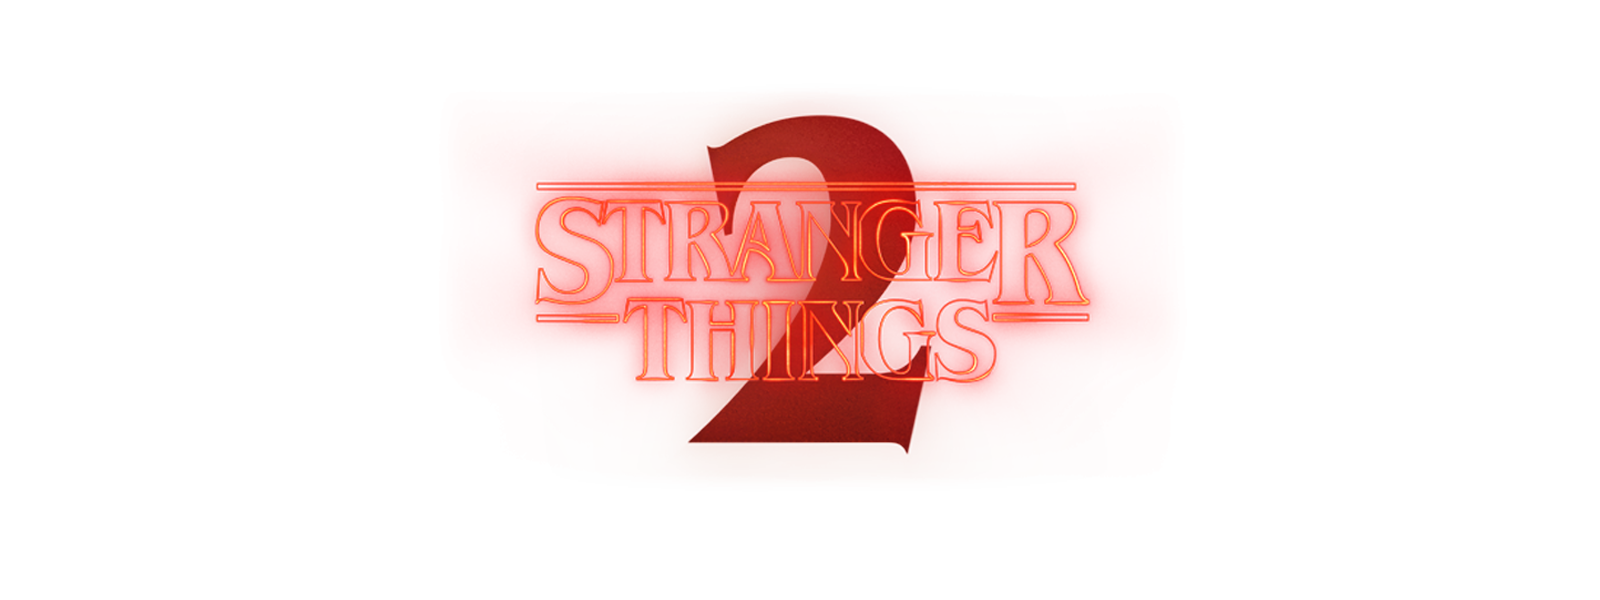 Second thing second. Stranger things 2 лого. Stranger things 4 Vol 2 logo. Stranger things 2 logo PNG. Stranger things 2 logo без фона.